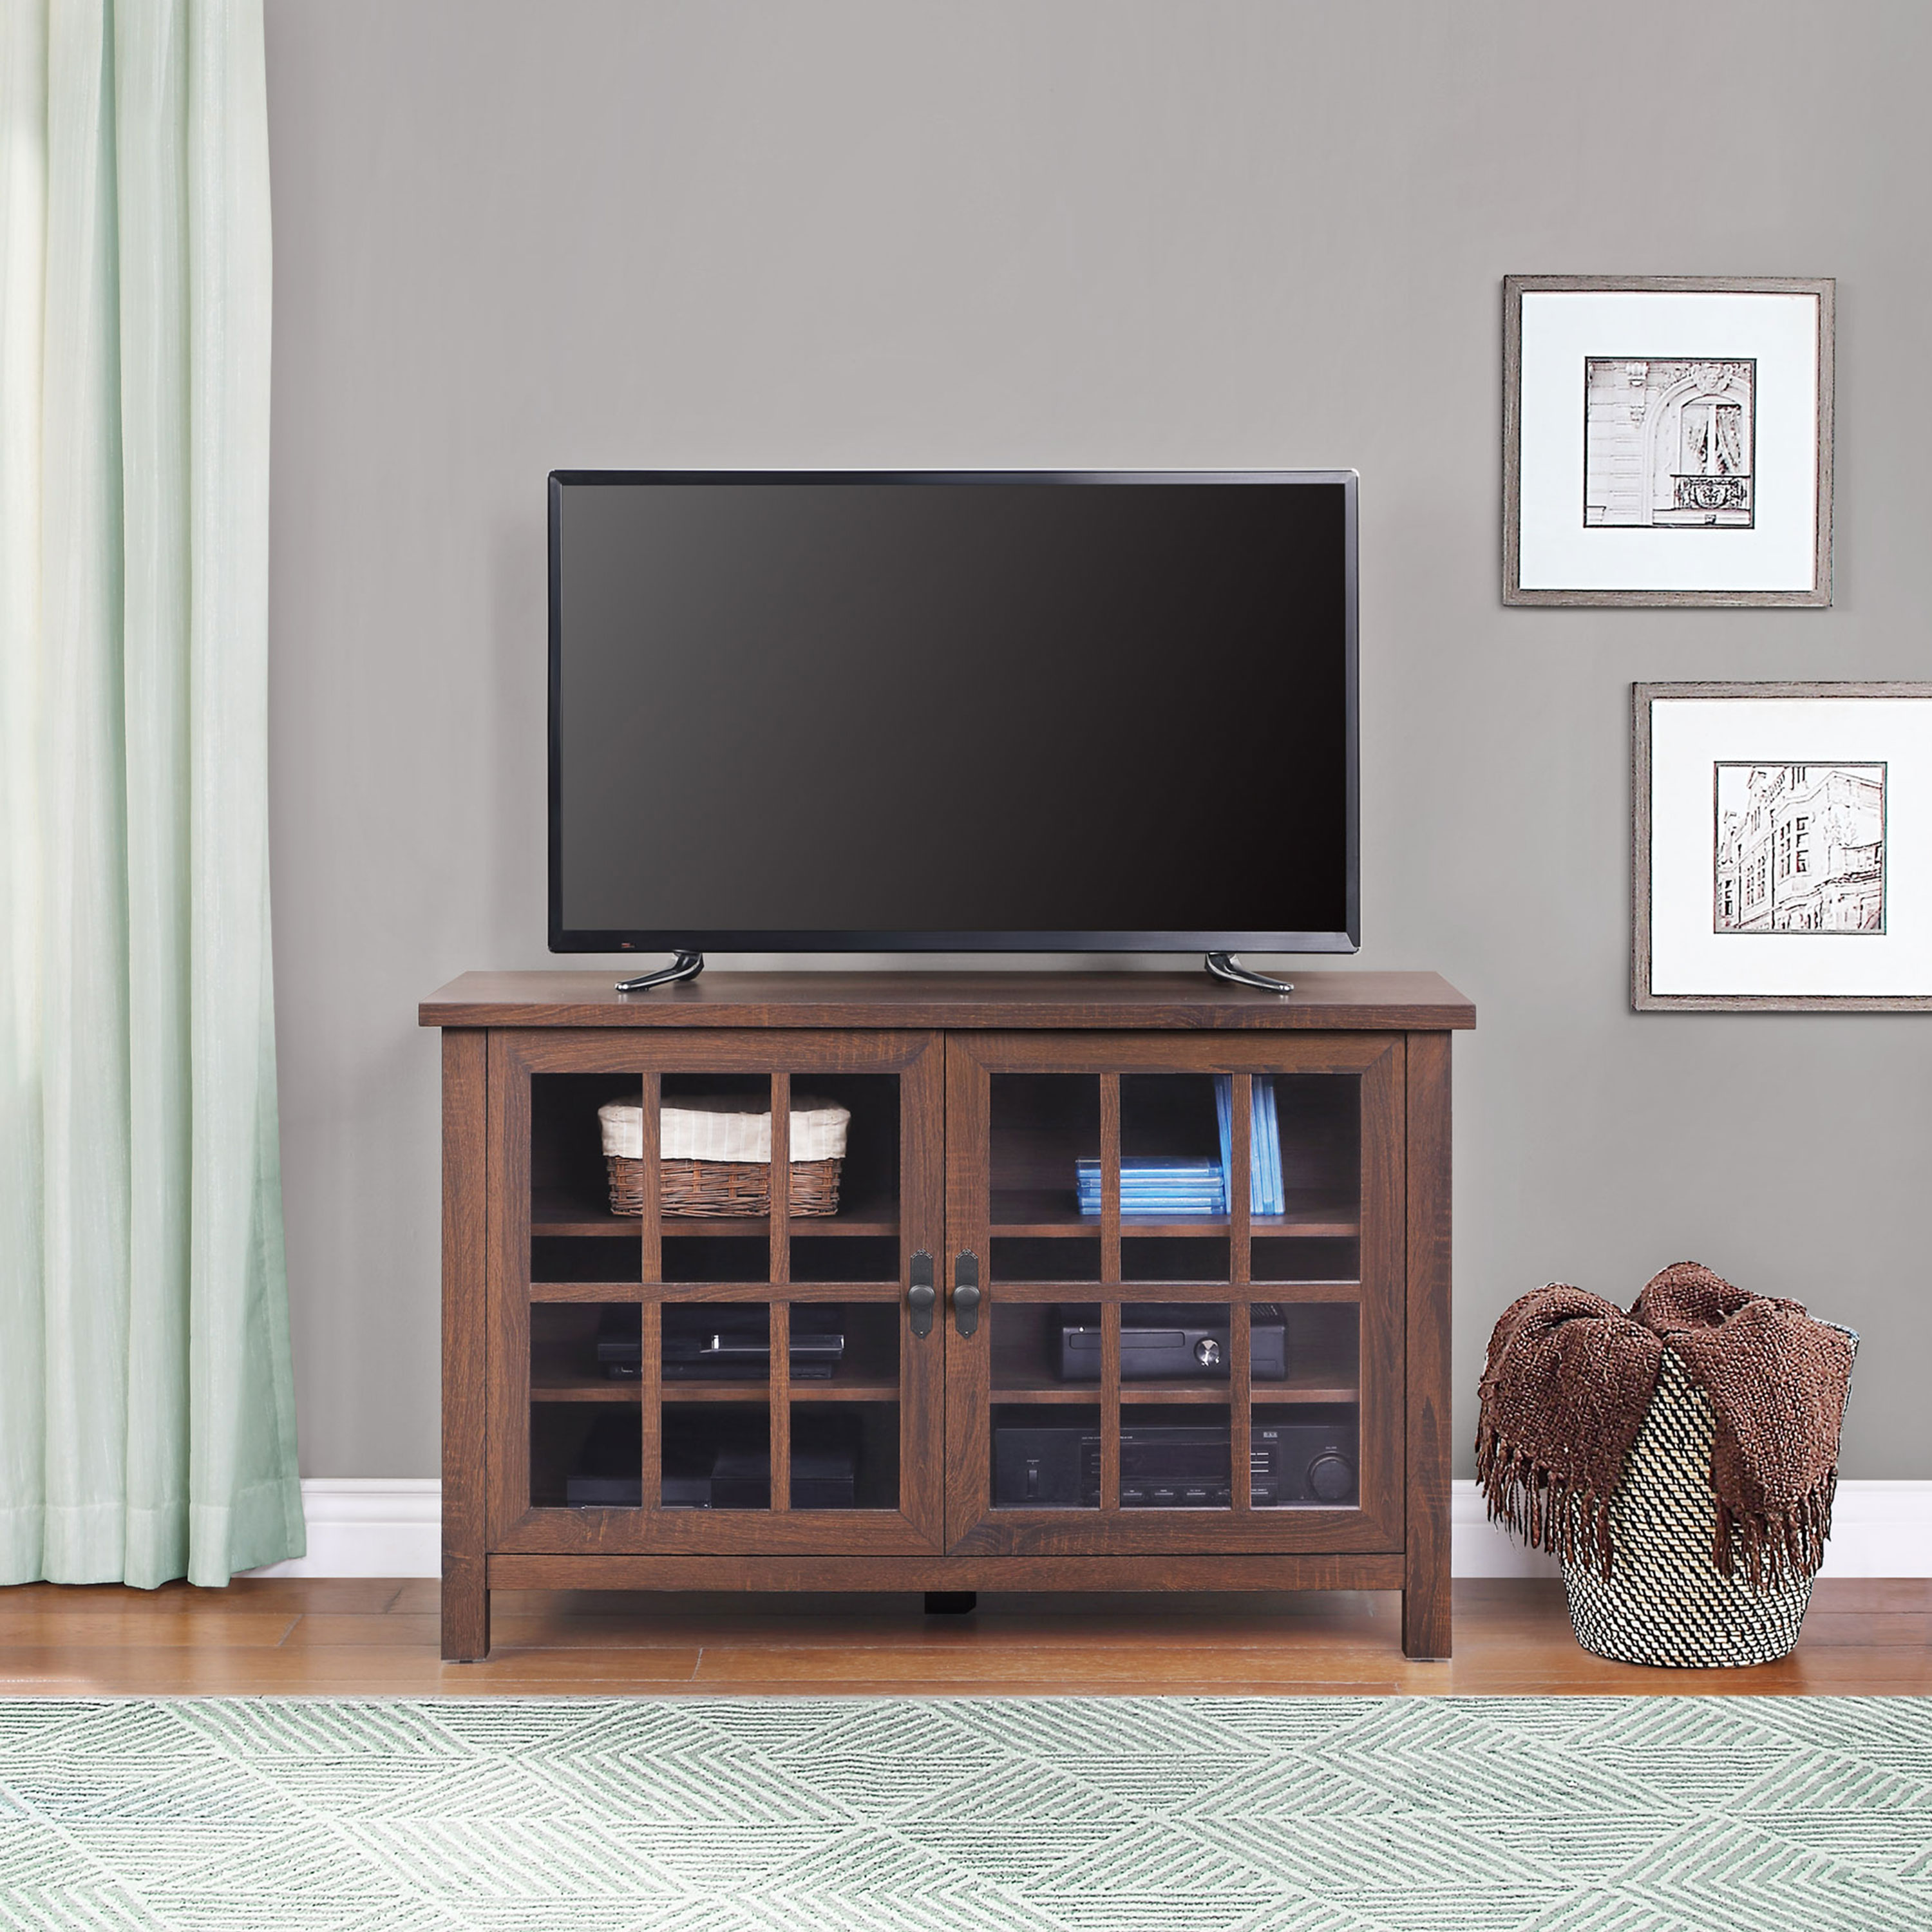 Better Homes & Gardens Oxford Square TV Stand for TVs up to 55", Dark Brown - image 4 of 12